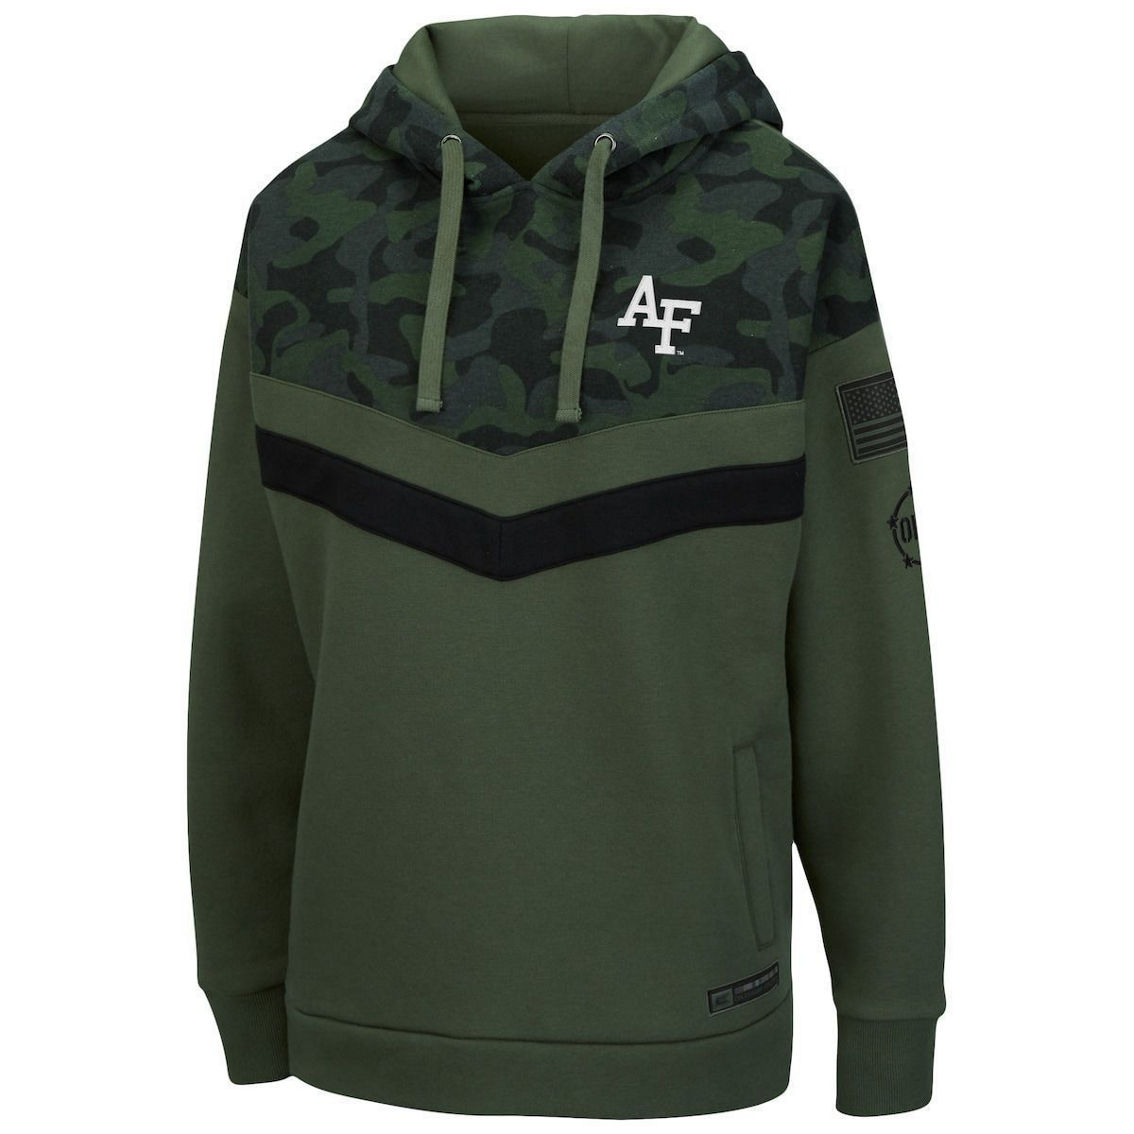 Colosseum Women's Olive/Camo Air Force Falcons OHT Military Appreciation Extraction Chevron Pullover Hoodie - Image 3 of 4